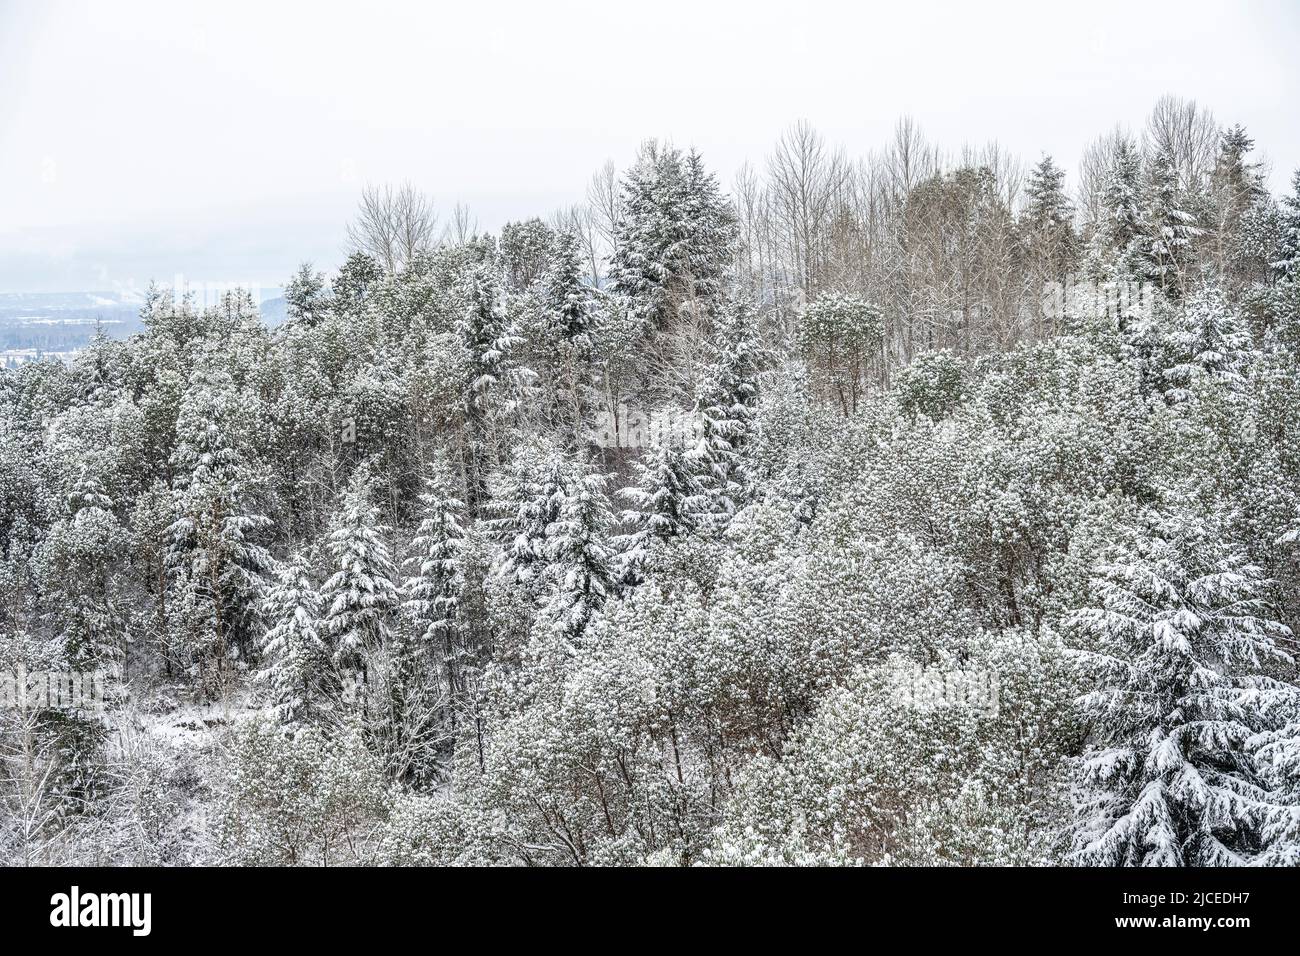 hillside with fir and madrone trees covered in snow Stock Photo